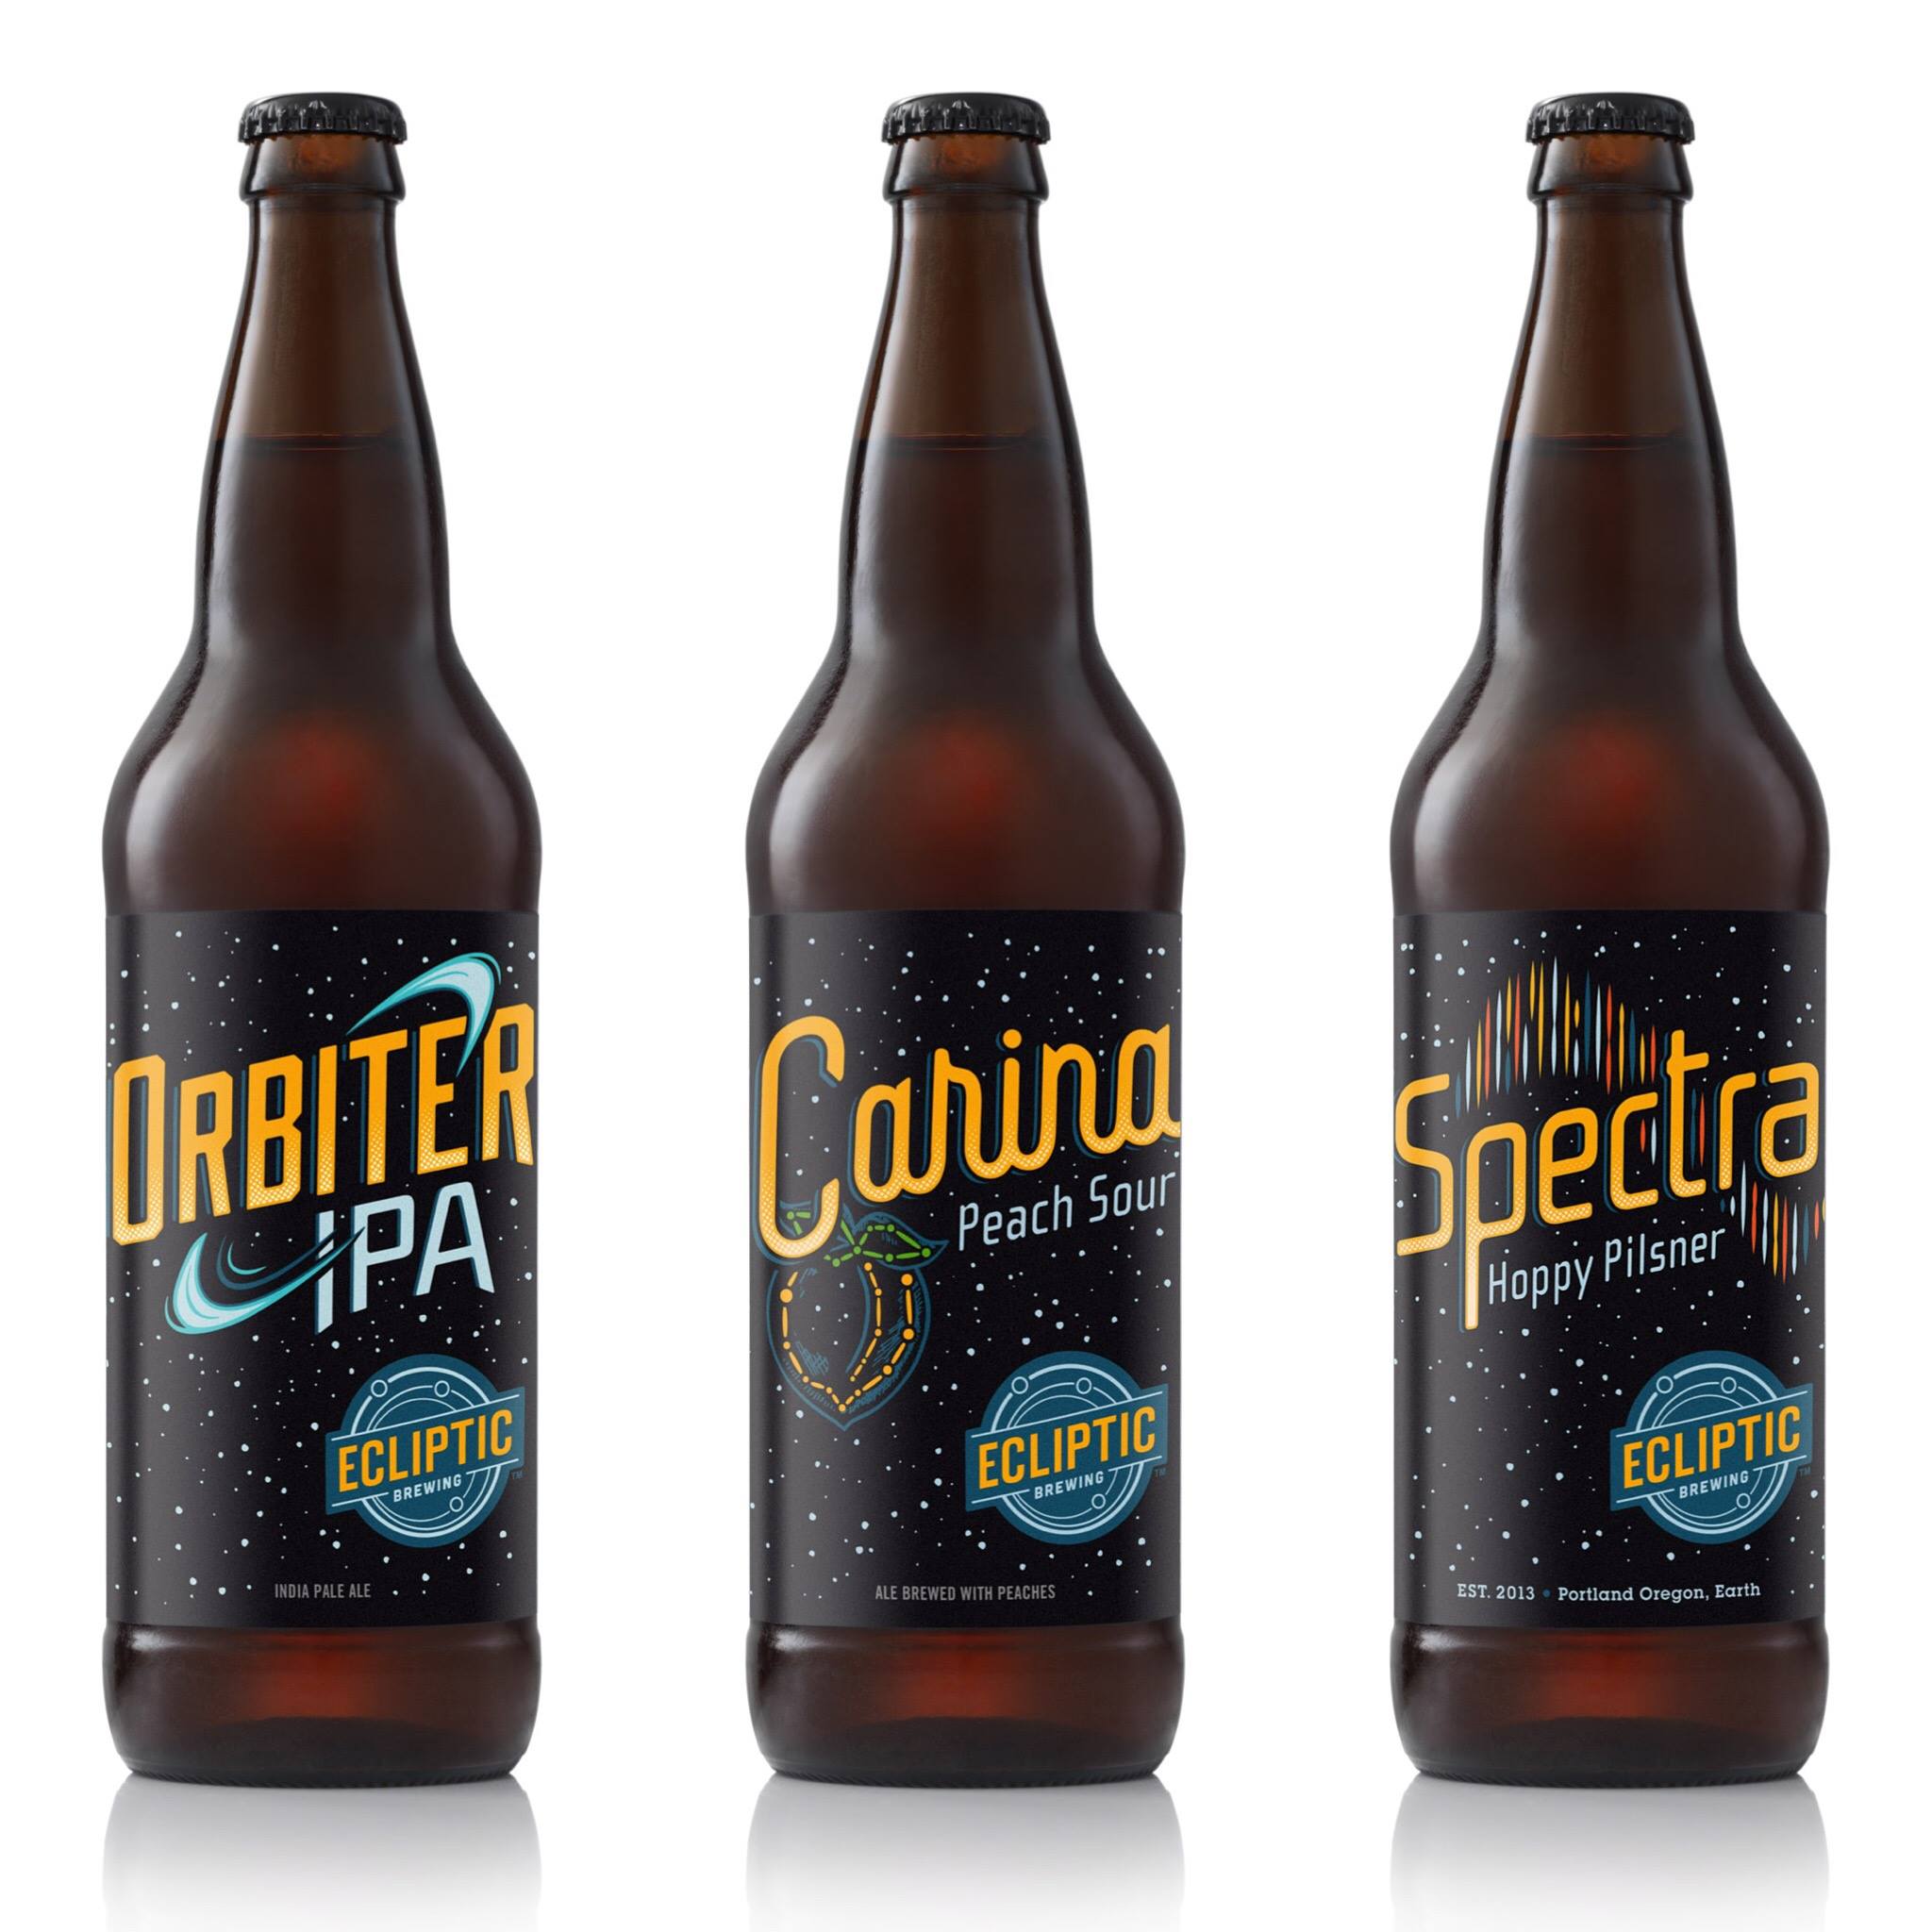 New labels for Ecliptic Brewing will hit store shelves in the near future. (image courtesy of Ecliptic Brewing)